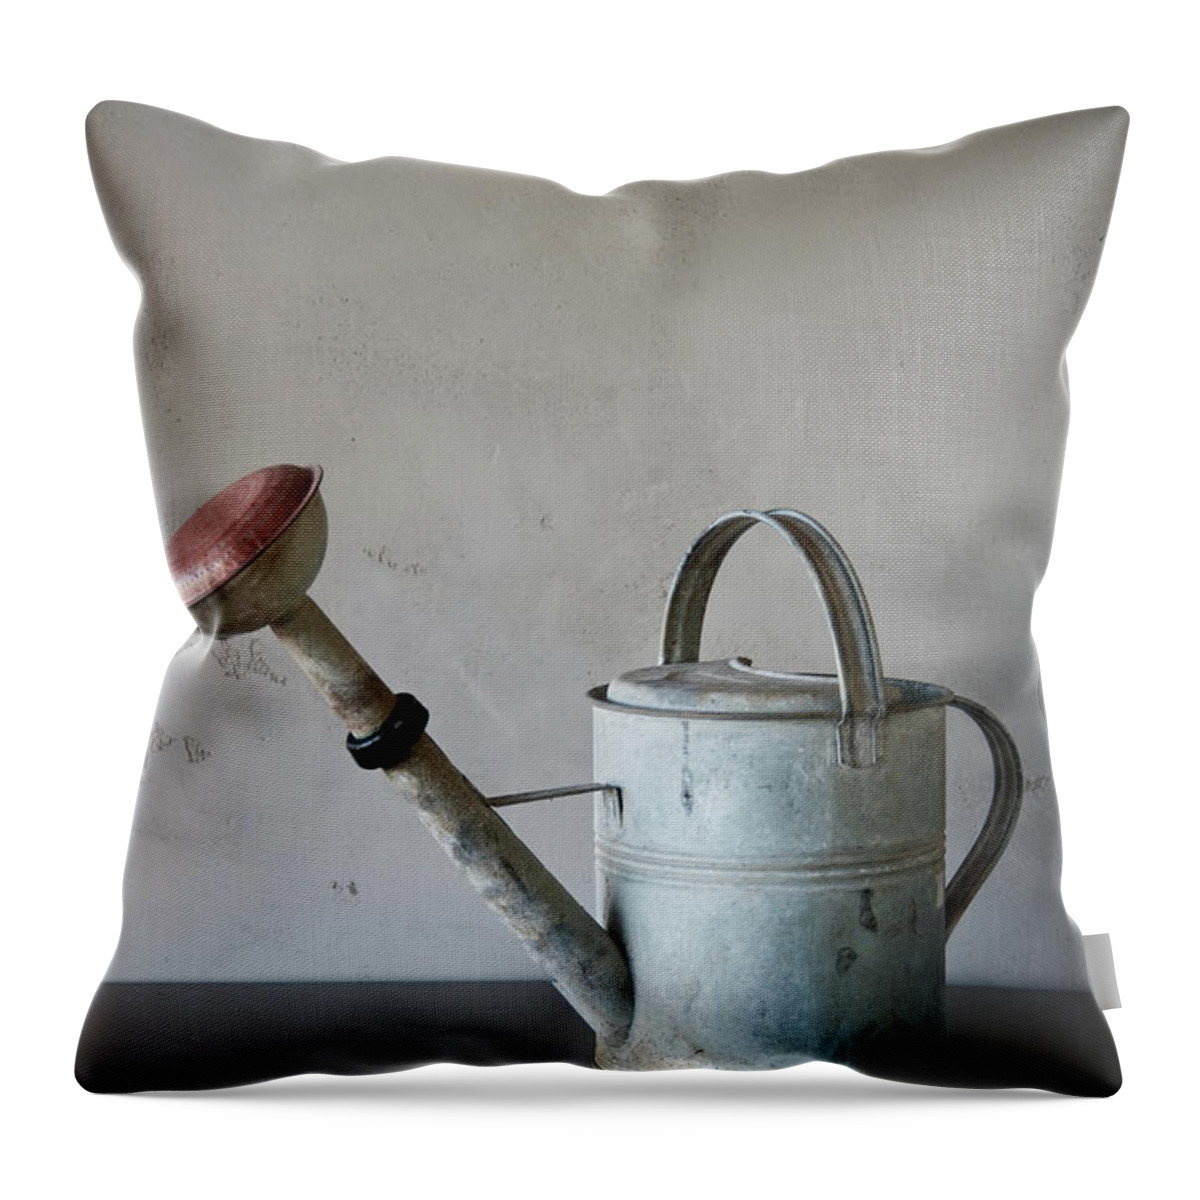 California Throw Pillow featuring the photograph Old Watering Can by Hilary Brodey